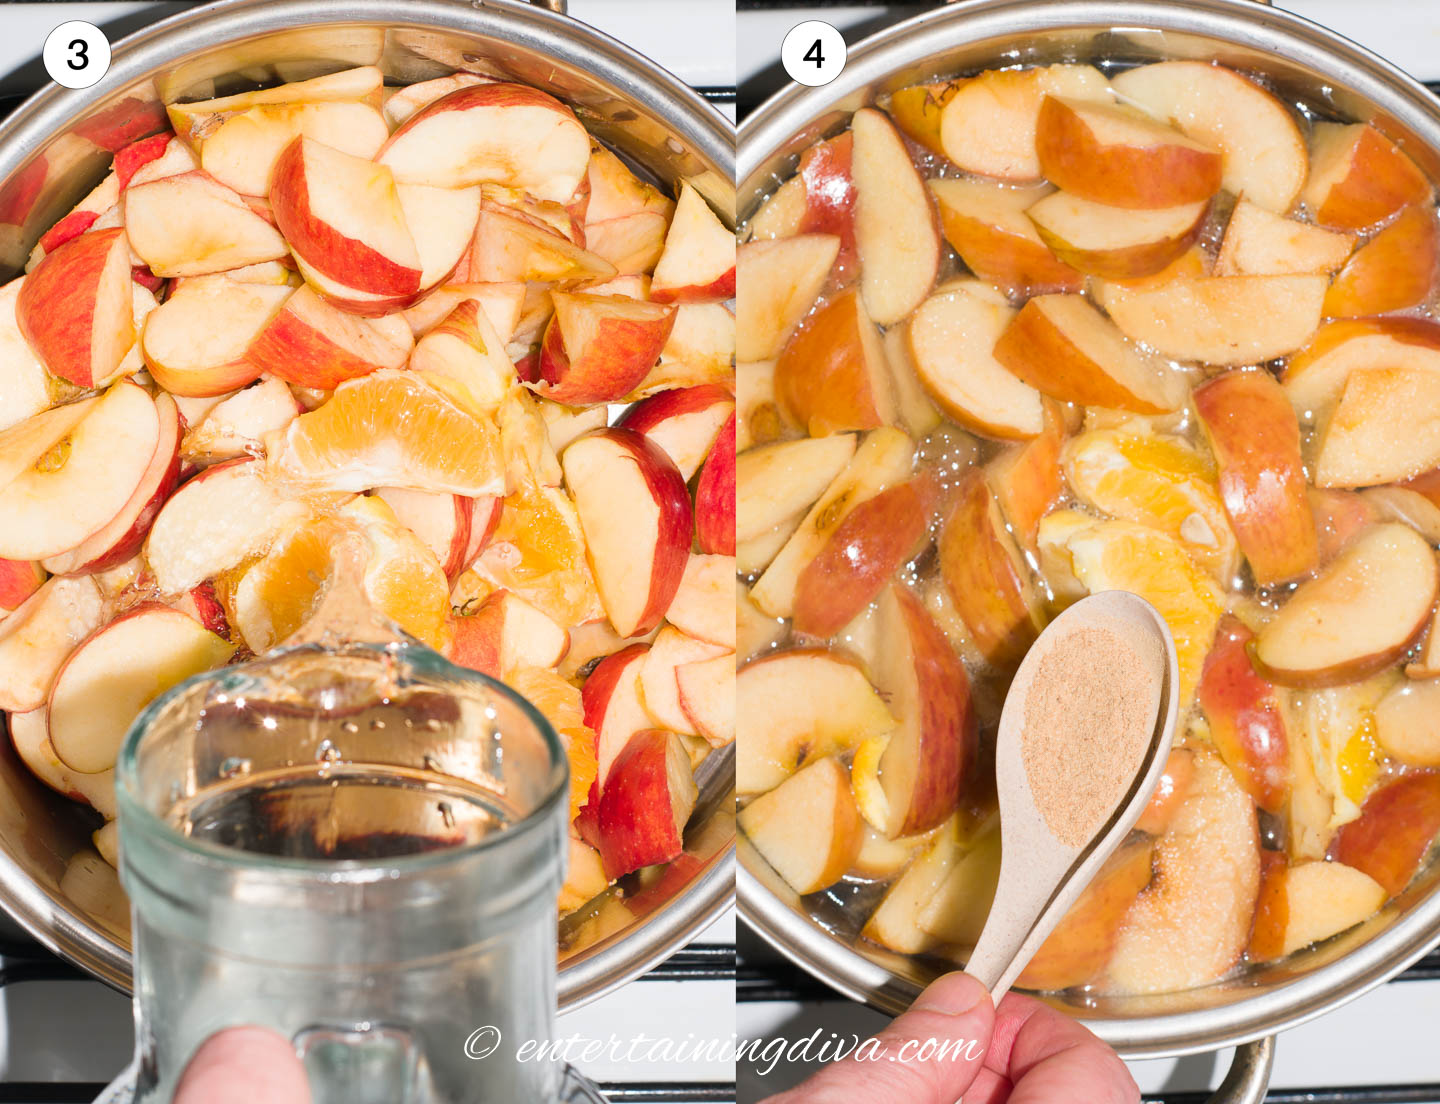 pouring water over sliced oranges and apples and adding sweetener